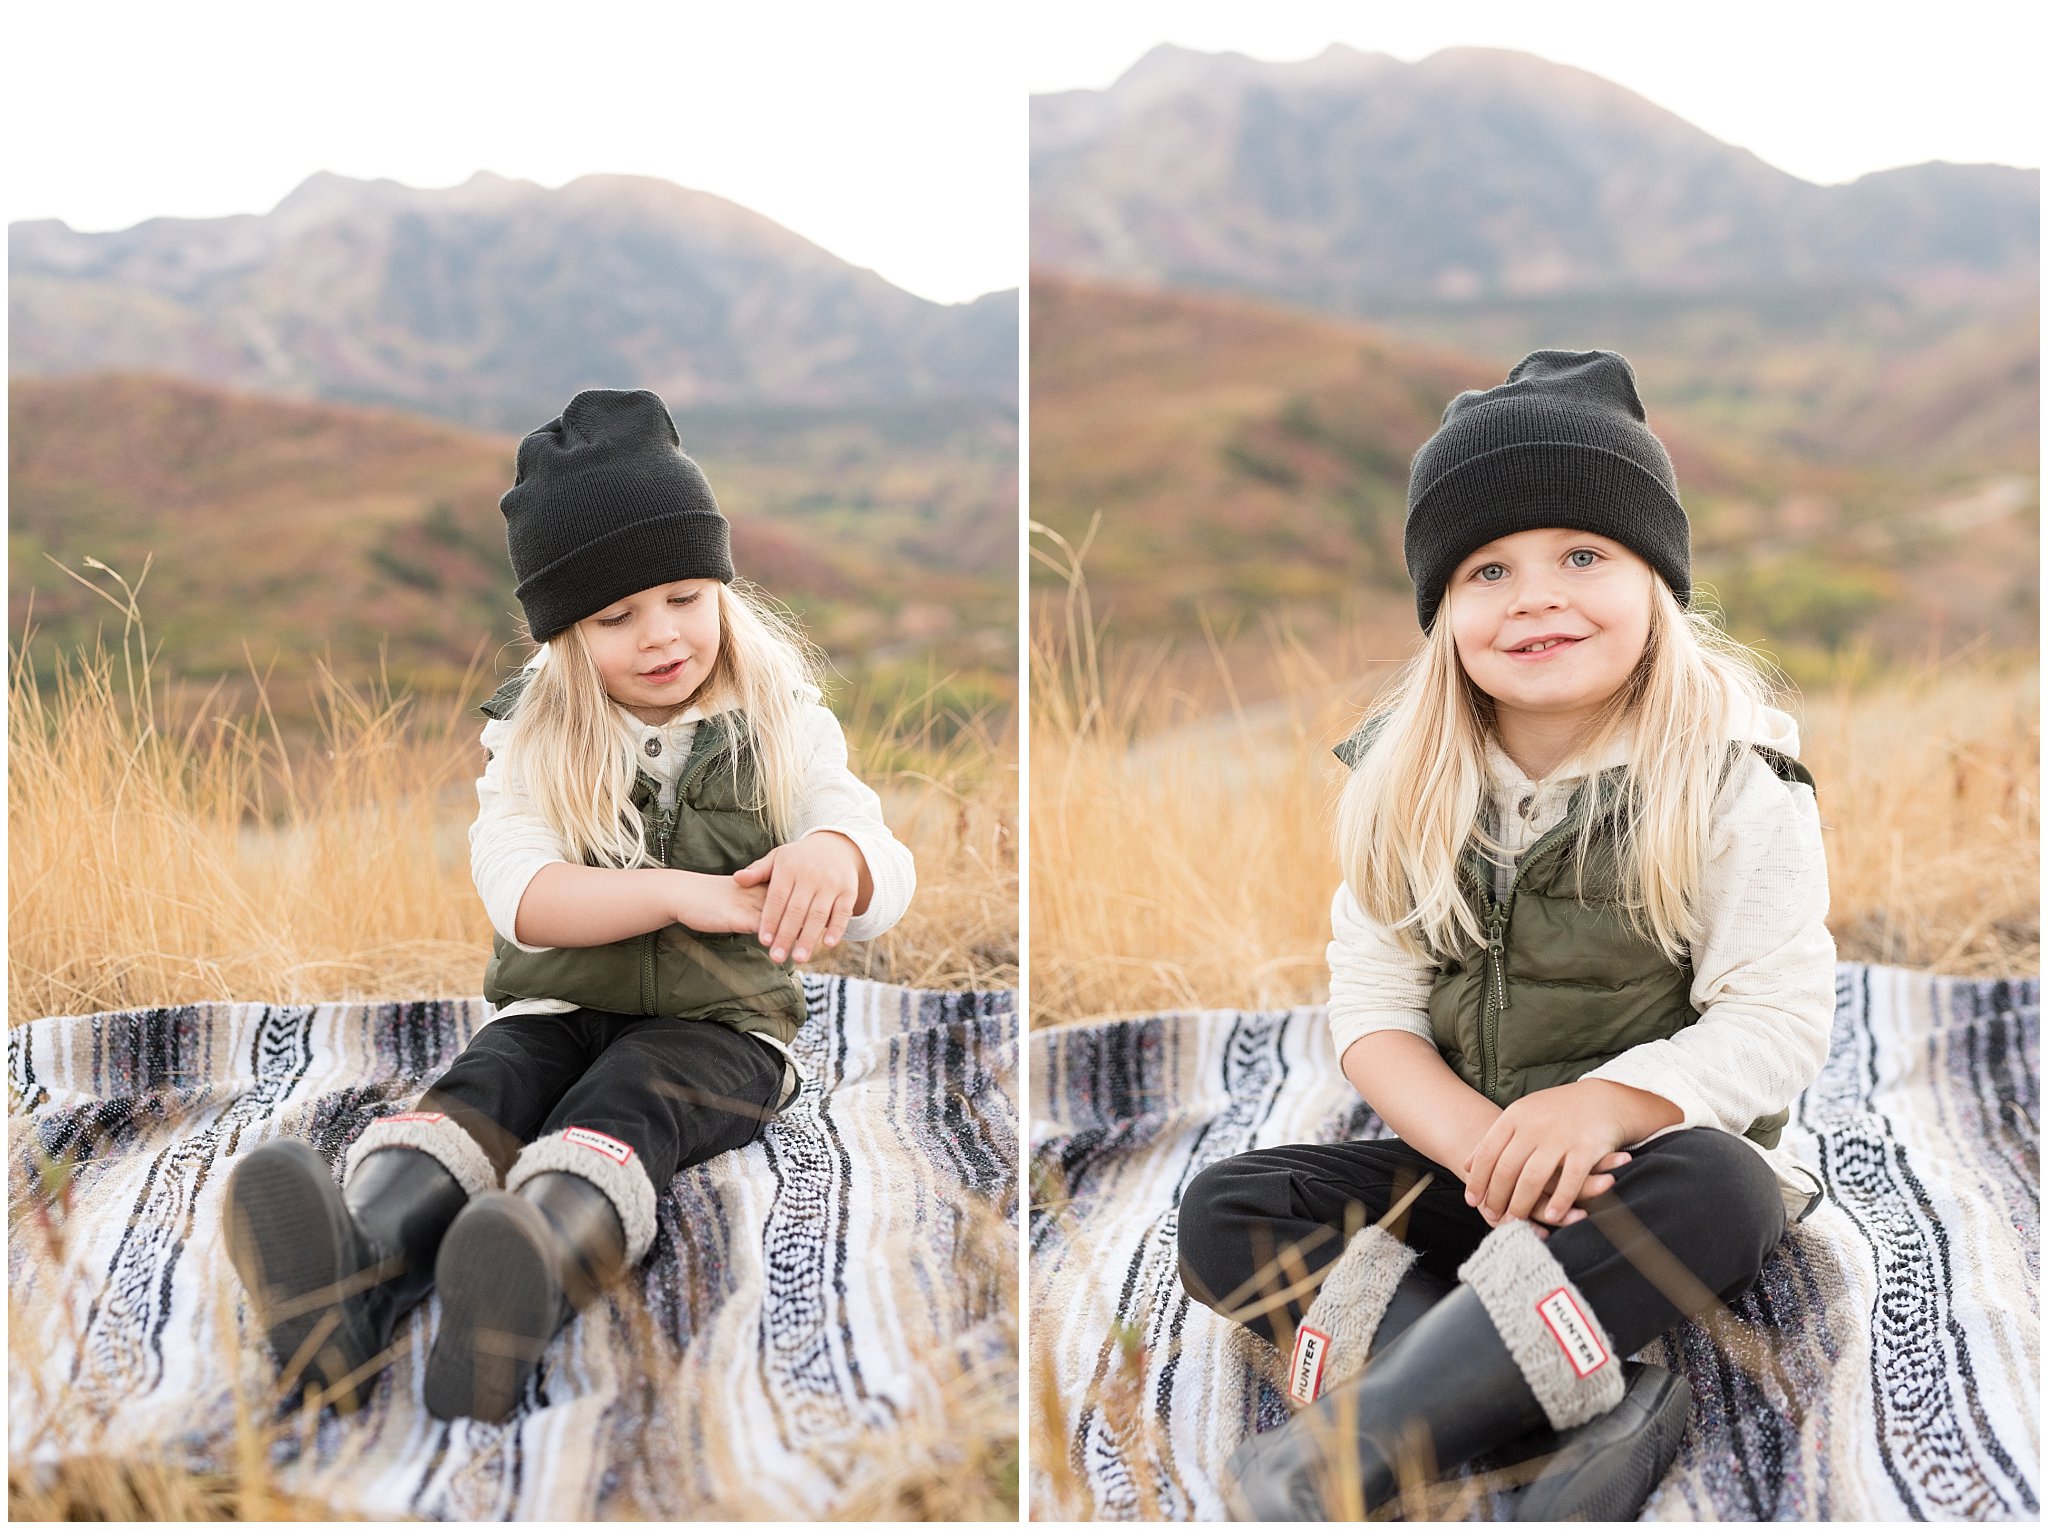 3 year old boy portraits in the mountains | Fall Family Pictures in the Mountains | Snowbasin, Utah | Jessie and Dallin